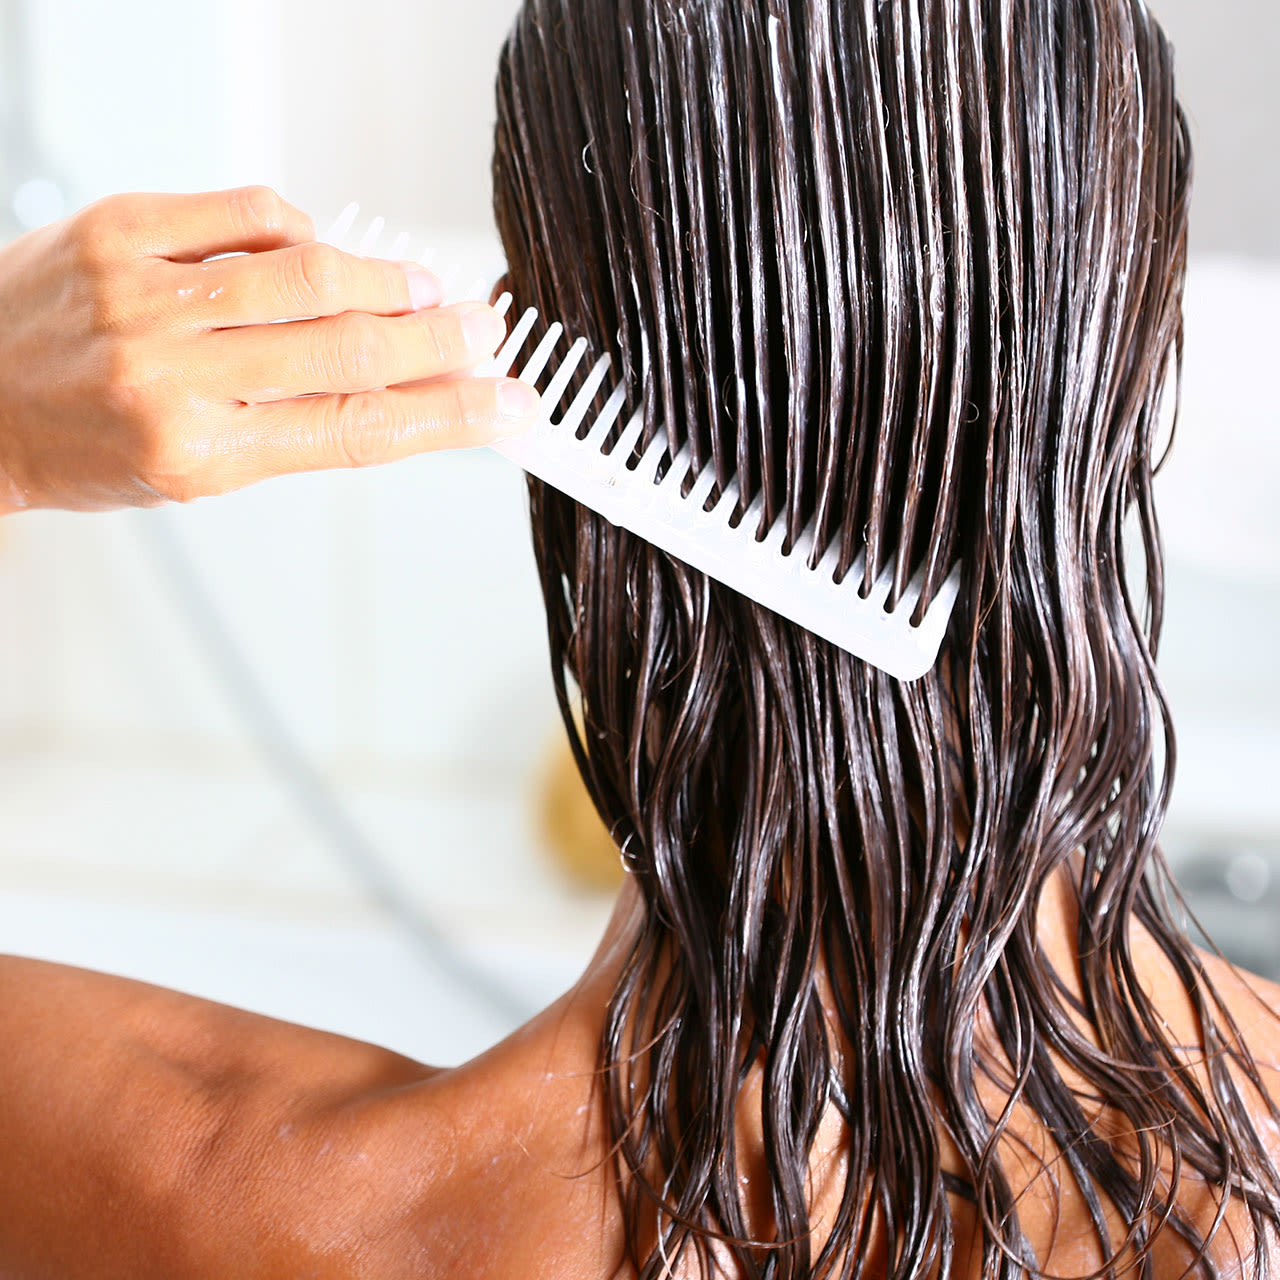 Dermatologists Share 3 Conditioner Ingredients That Can Lead To Faster Hair Loss Over 40—And What To Use Instead